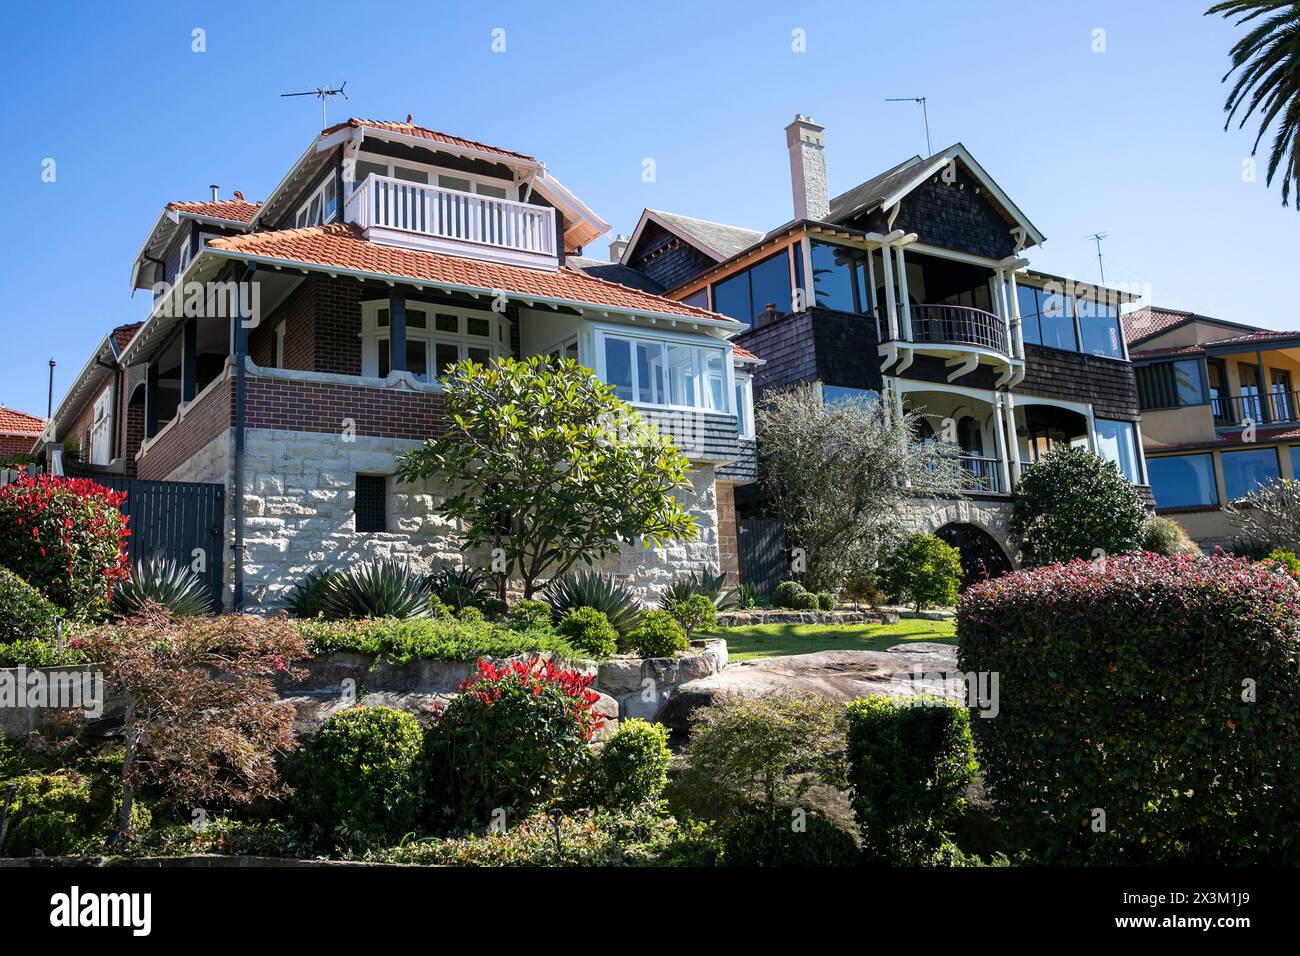 Arts and Crafts architectural style family home on Cremorne Point overlooking Mosman Bay, viewed from the cremorne foreshore walk,Sydney,NSW,Australia Stock Photo